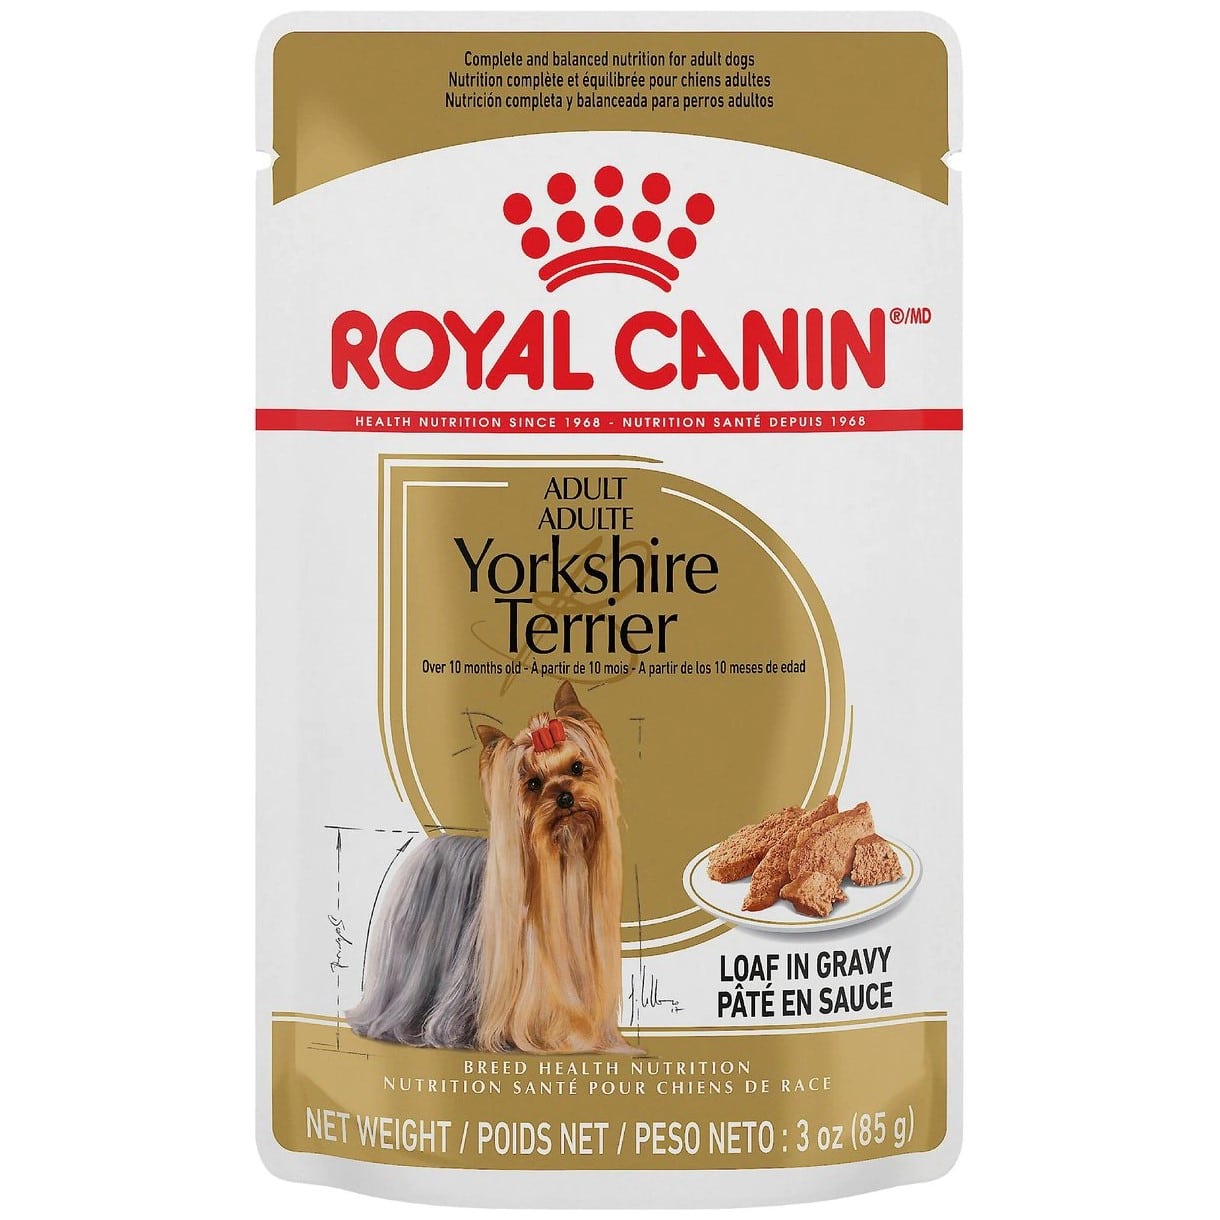 Royal Canin Breed Health Nutrition Yorkshire Terrier Adult Loaf in Gravy Pouch Dog Food